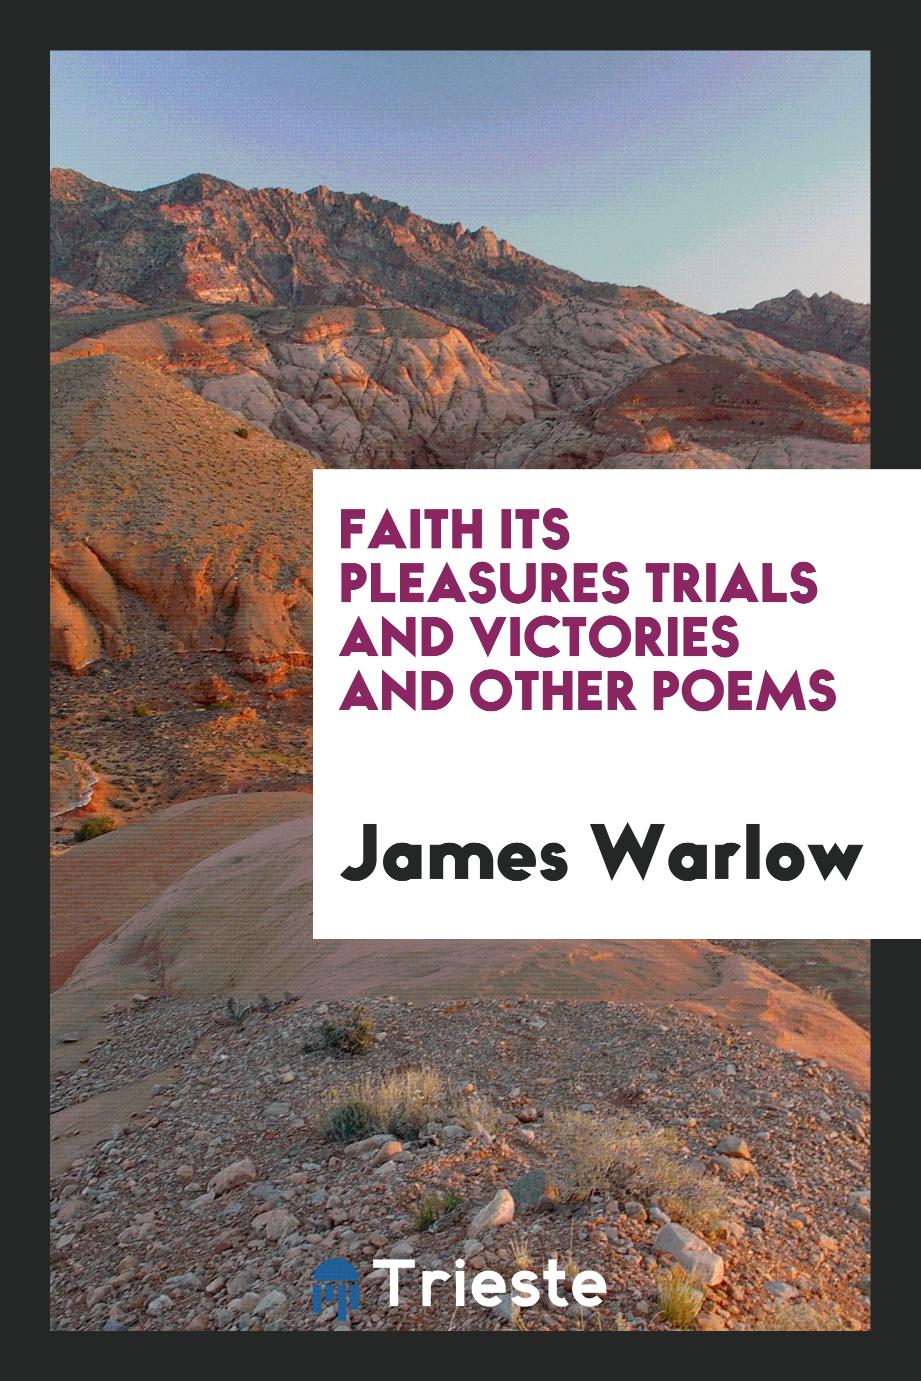 Faith Its Pleasures Trials and Victories and Other Poems